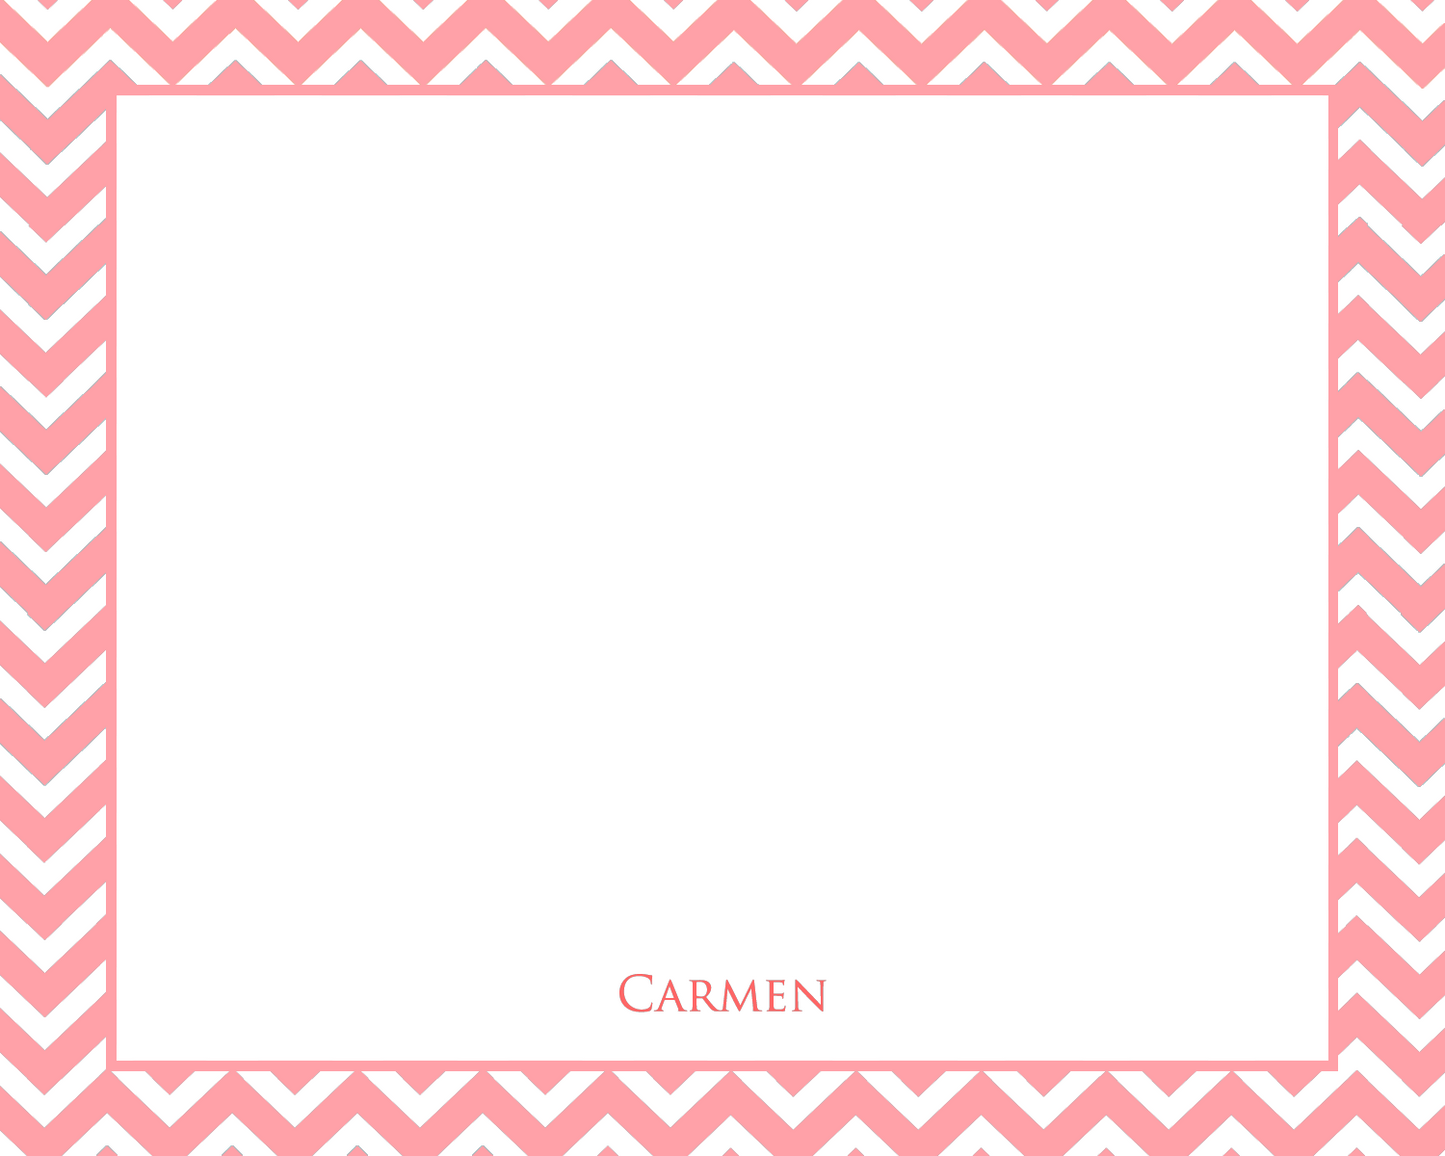 Carmen Personalized Gift Cards